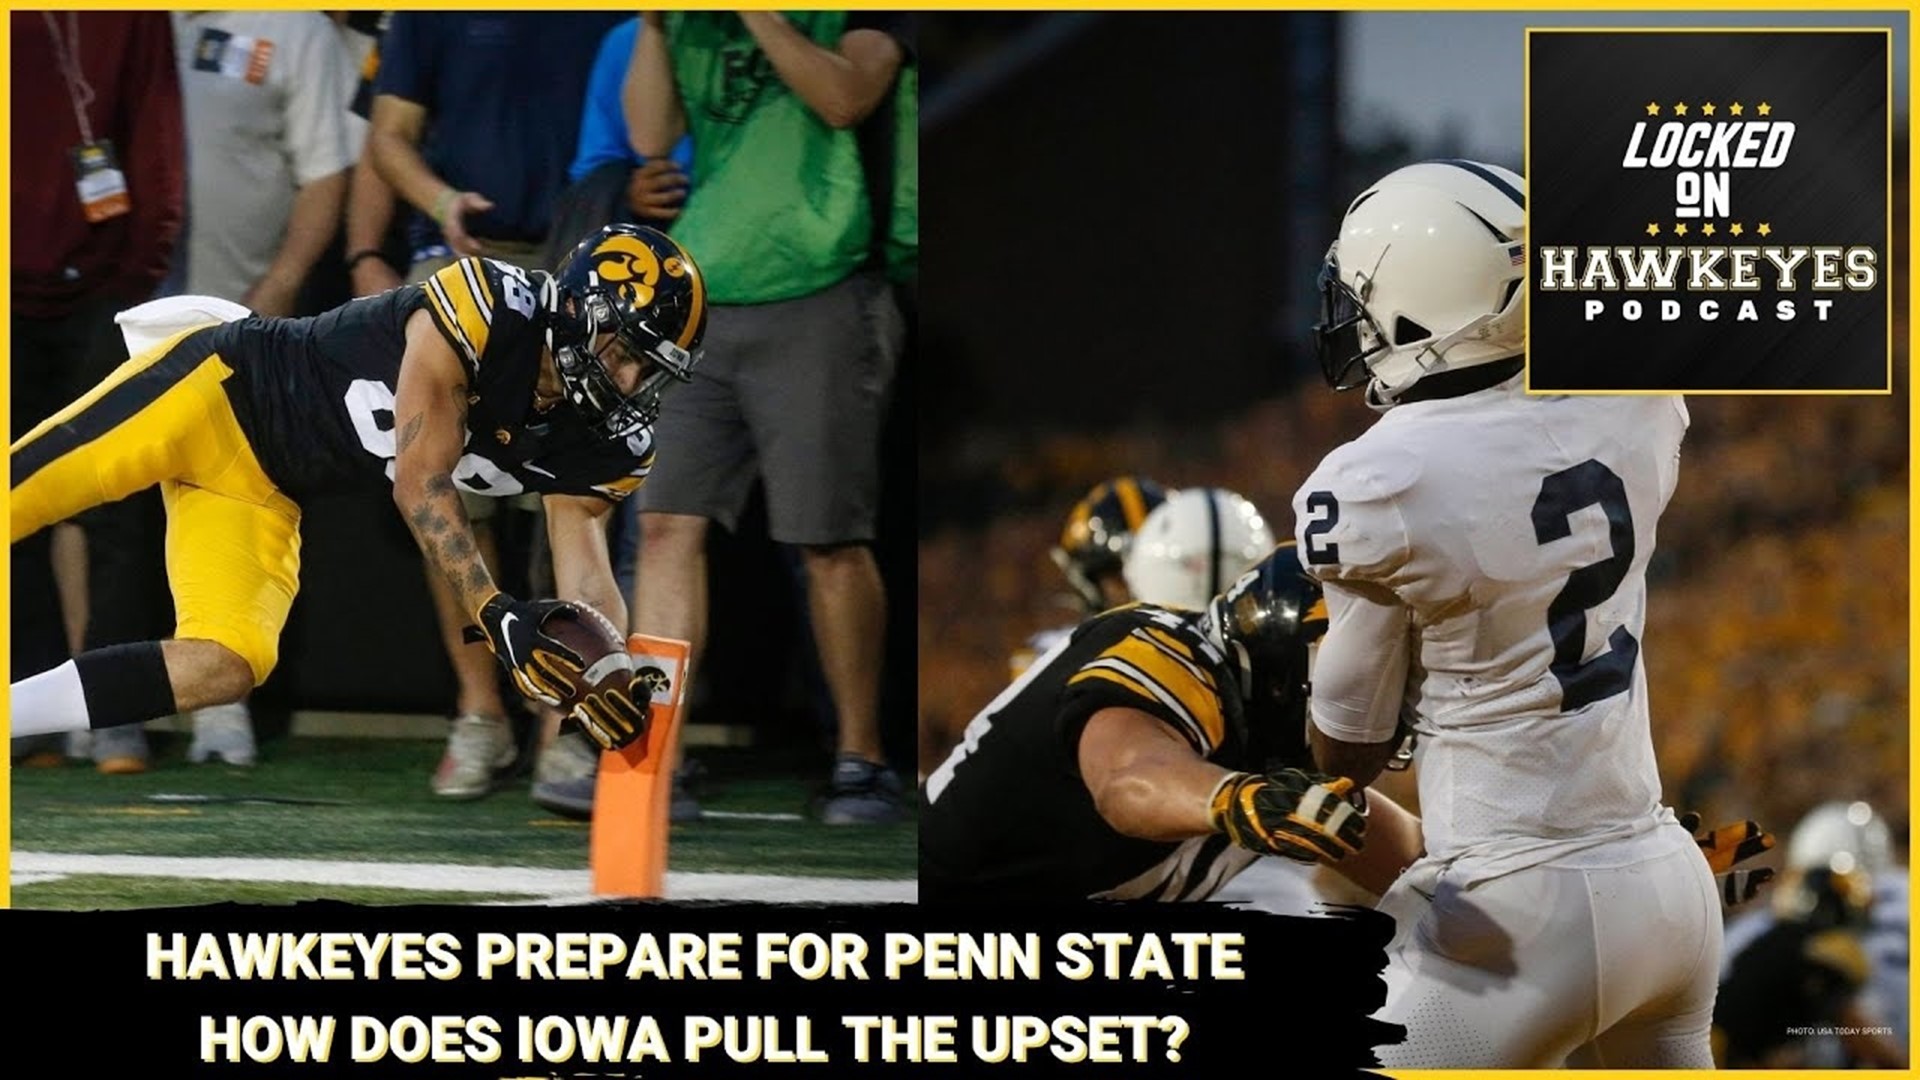 Iowa Football: A first look at the match up with Penn State